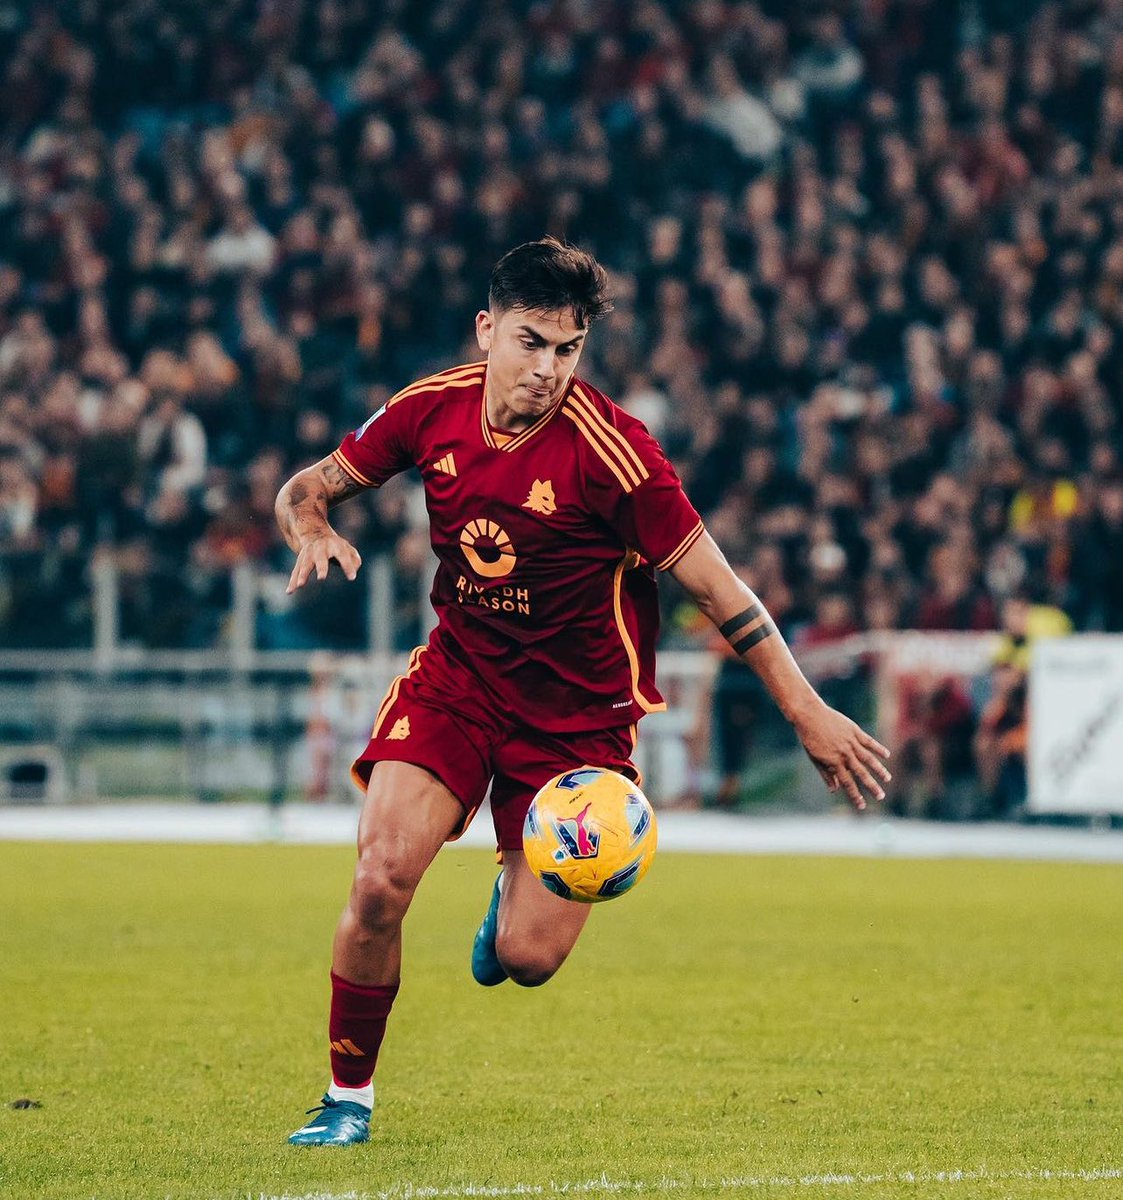 💣 #ASRoma 🔴 🇦🇷 AS Roma will listen to future offers in the summer transfer window for 30-year-old Argentine striker Paulo Dybala if contract extension talks fail. ▫️Saudi Pro League clubs are ready to pay the price set by AS Roma to sign the Argentine striker.